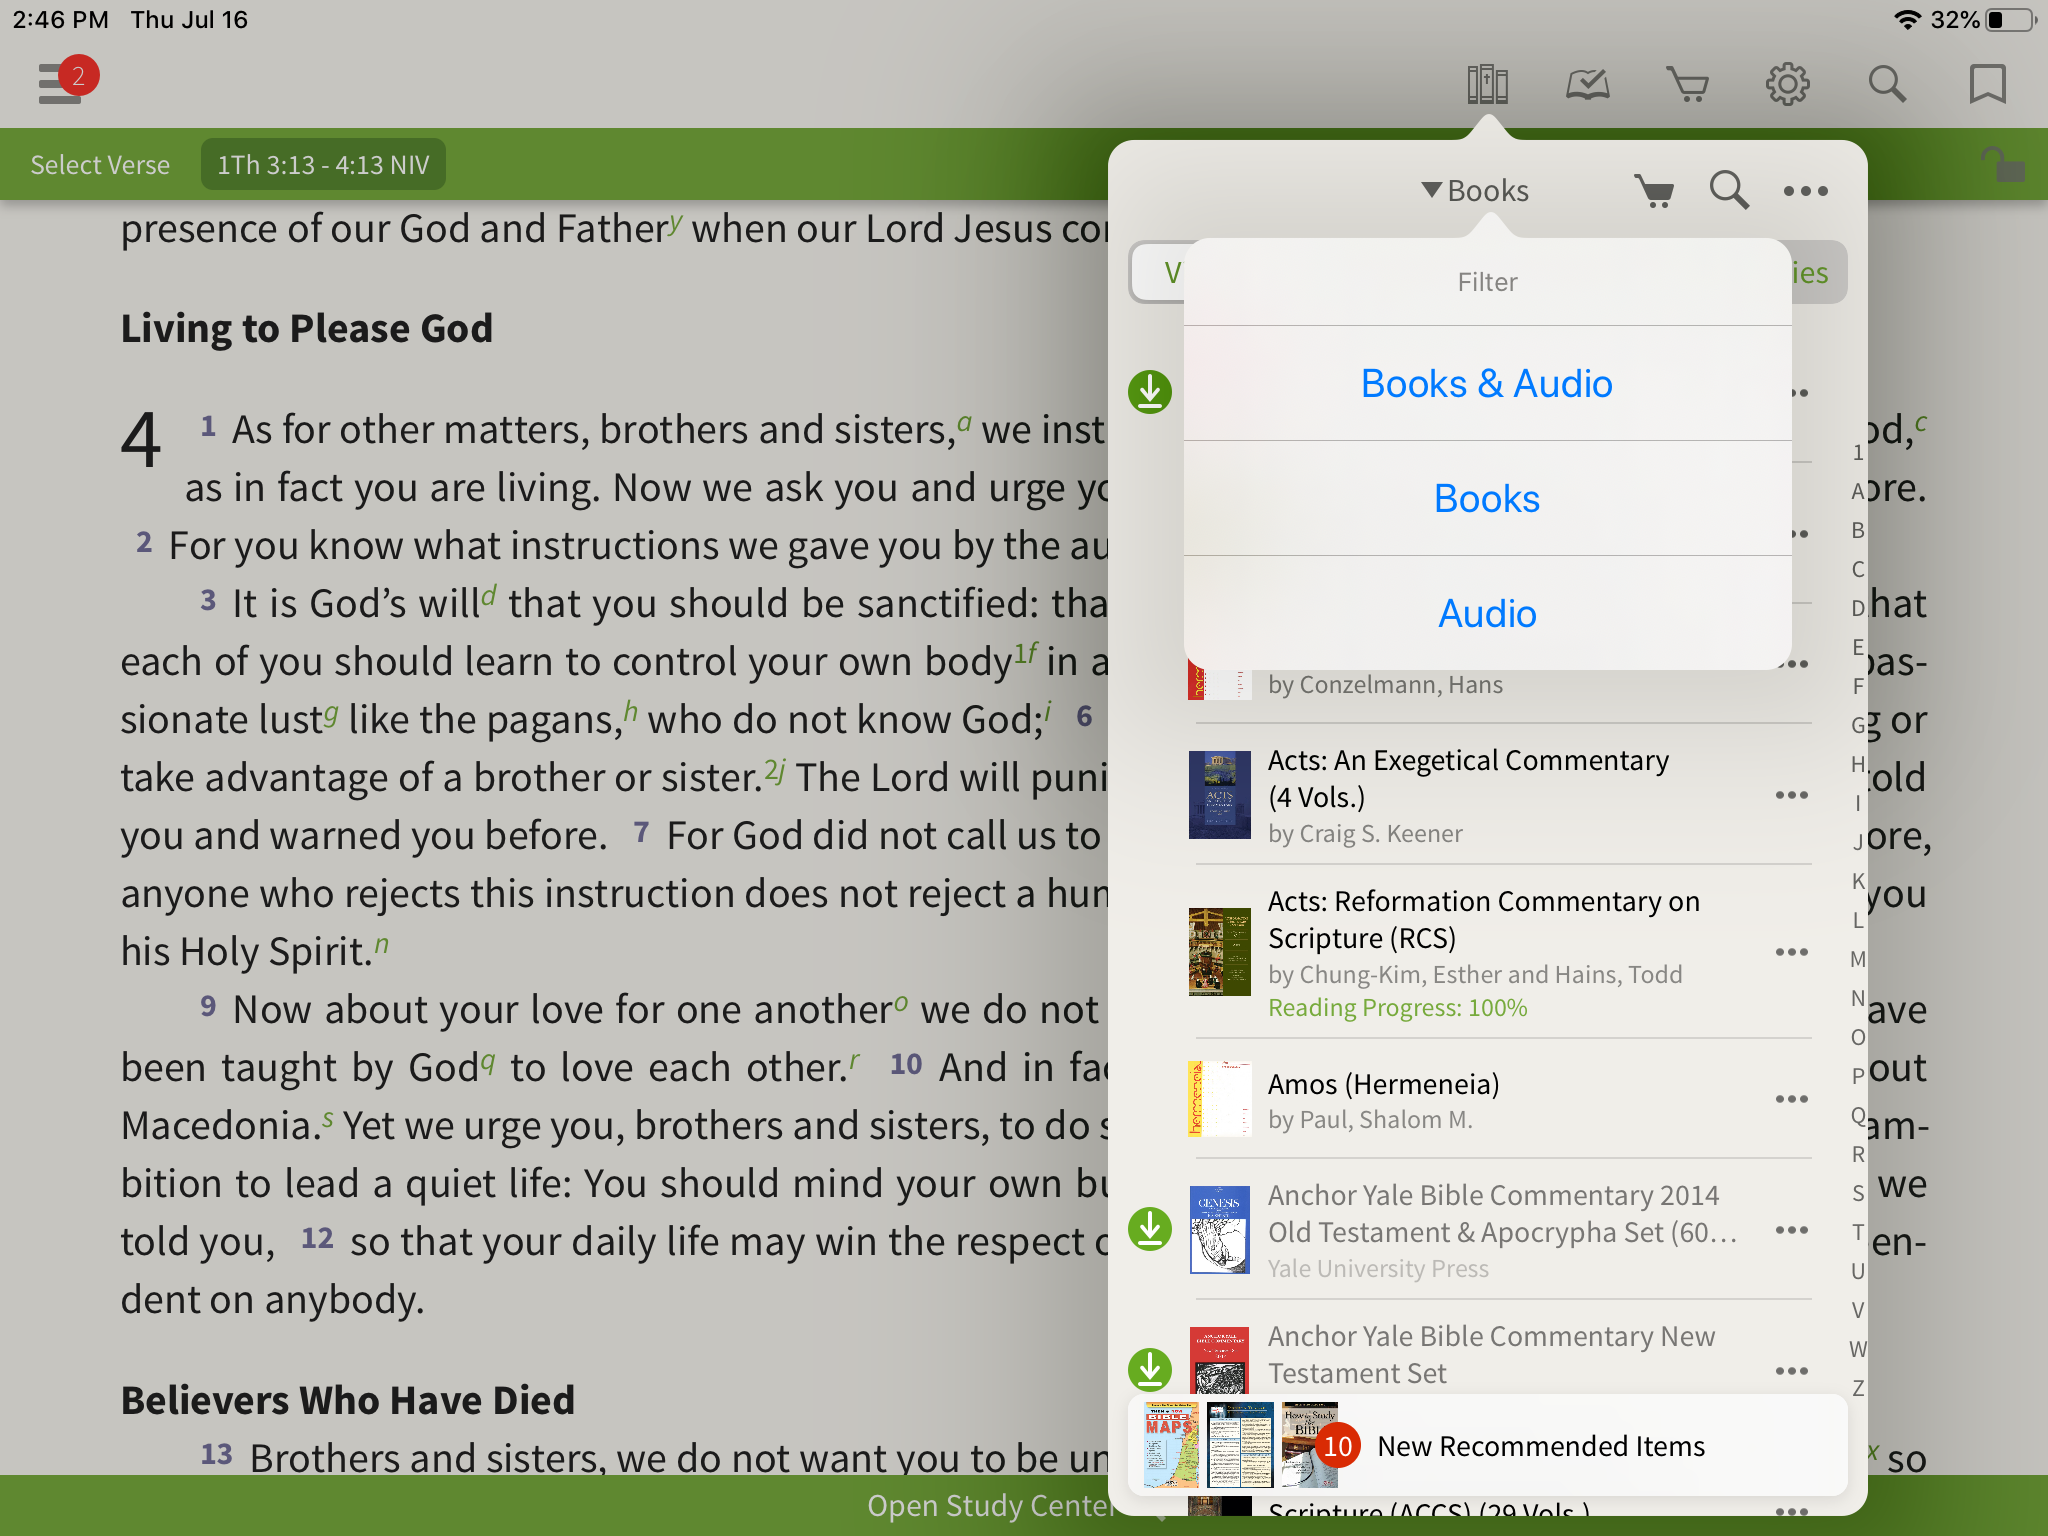 Switching between books and audio in the library of the Olive Tree bible App